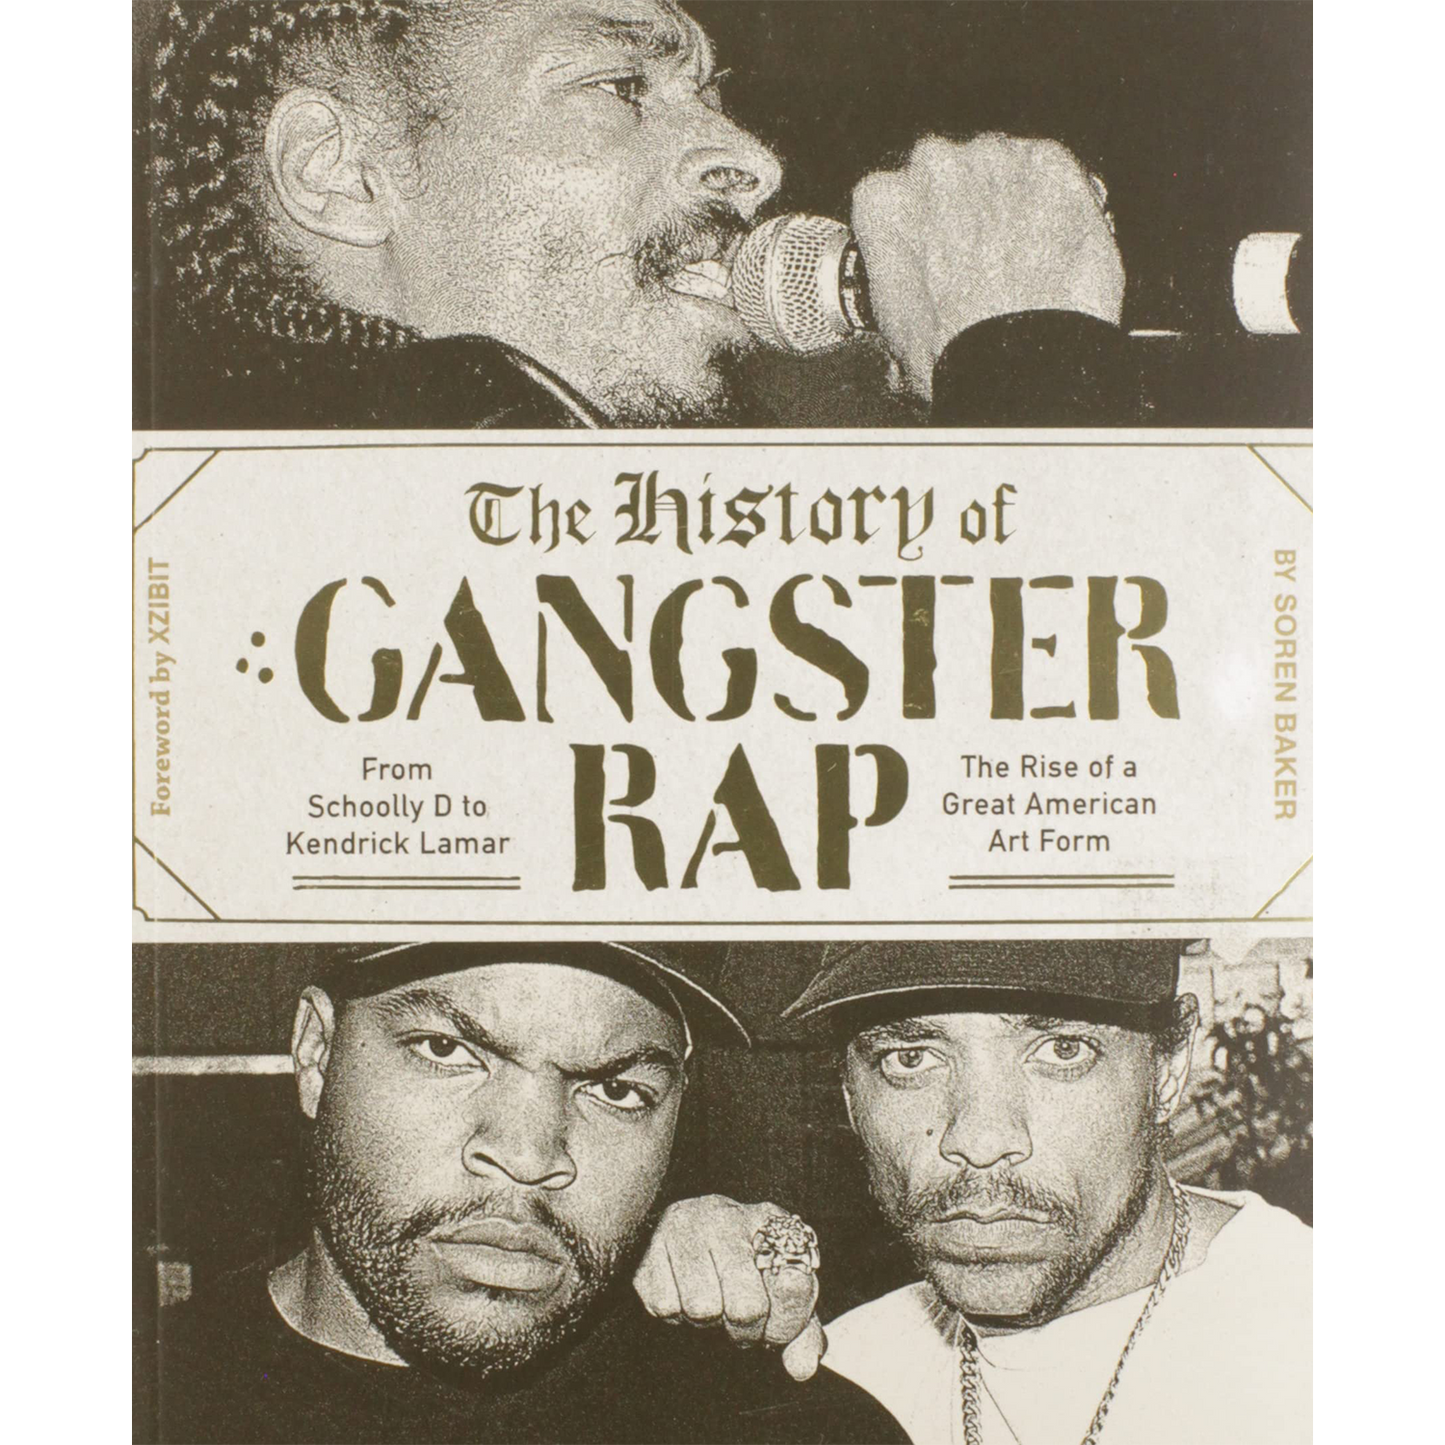 The History of Gangster Rap: From Schoolly D to Kendrick Lamar, the Rise of a Great American Art Form